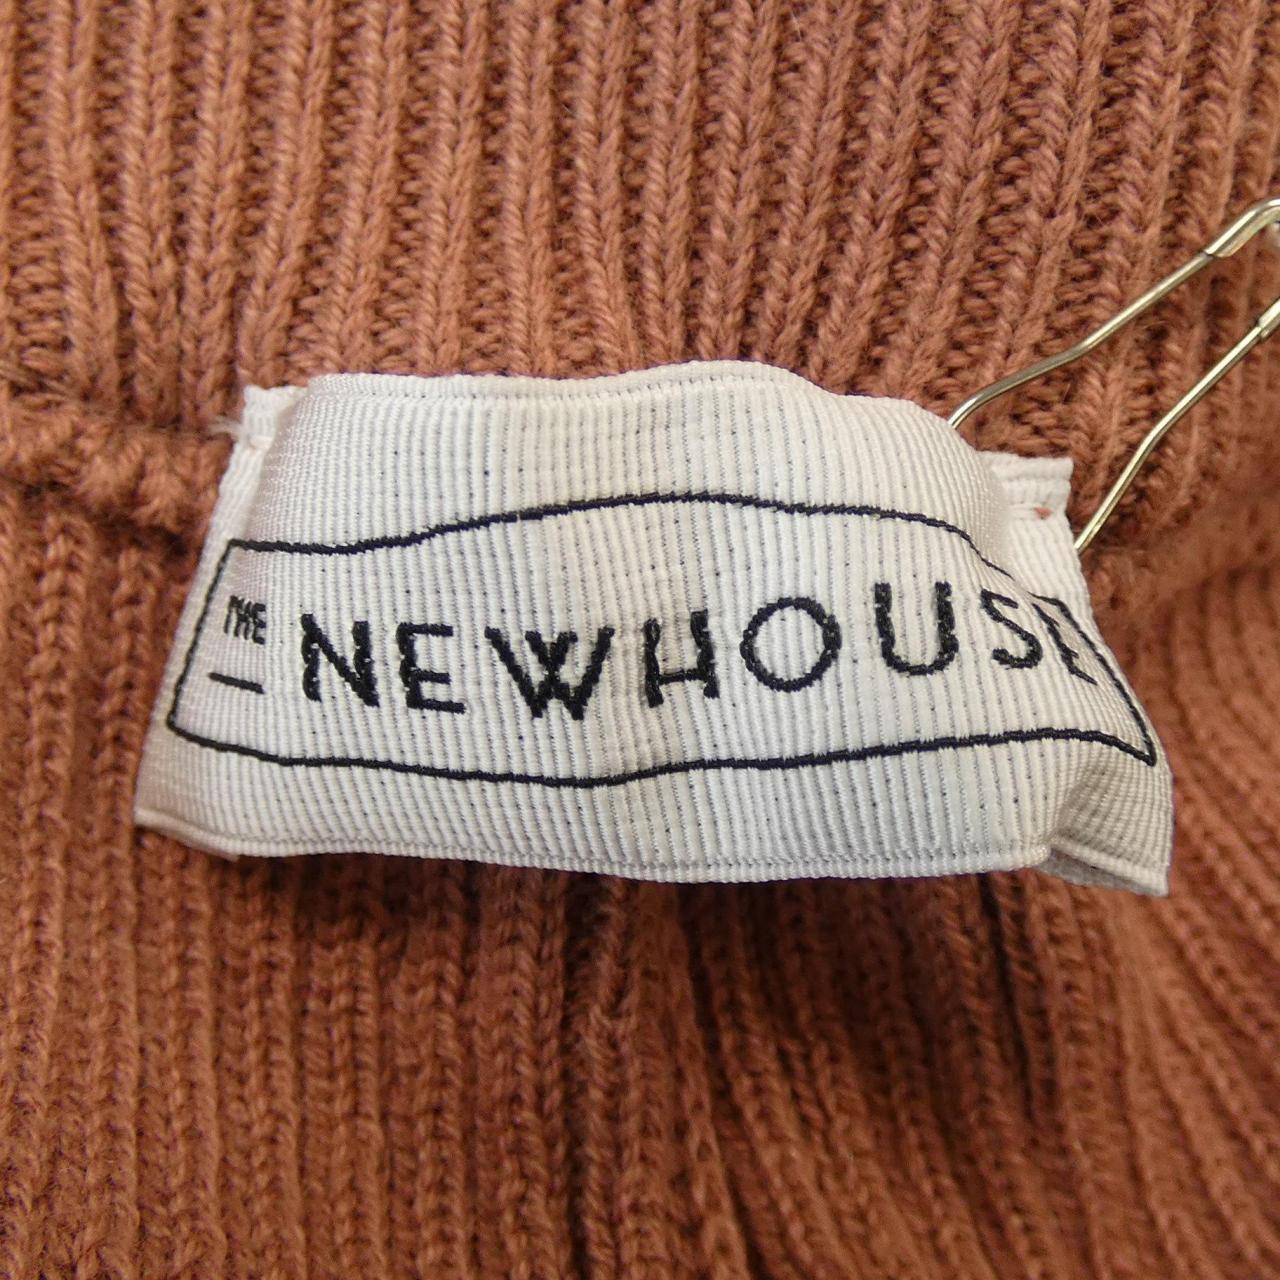 THE NEWHOUSE THE NEWHOUSE pants